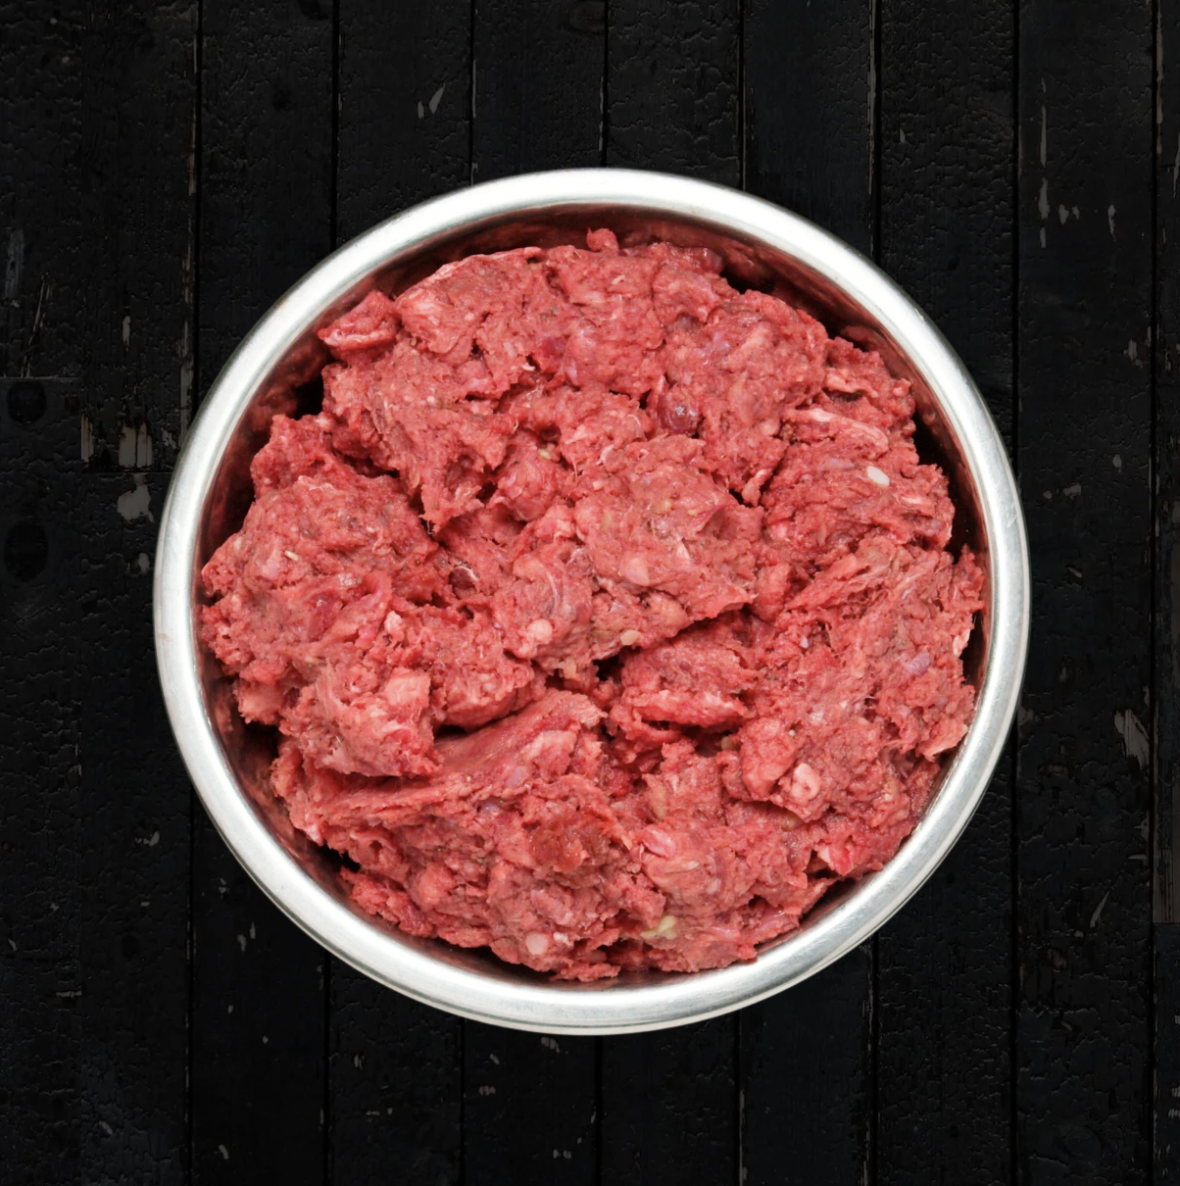 Best Raw Dog Foods for American Bullies